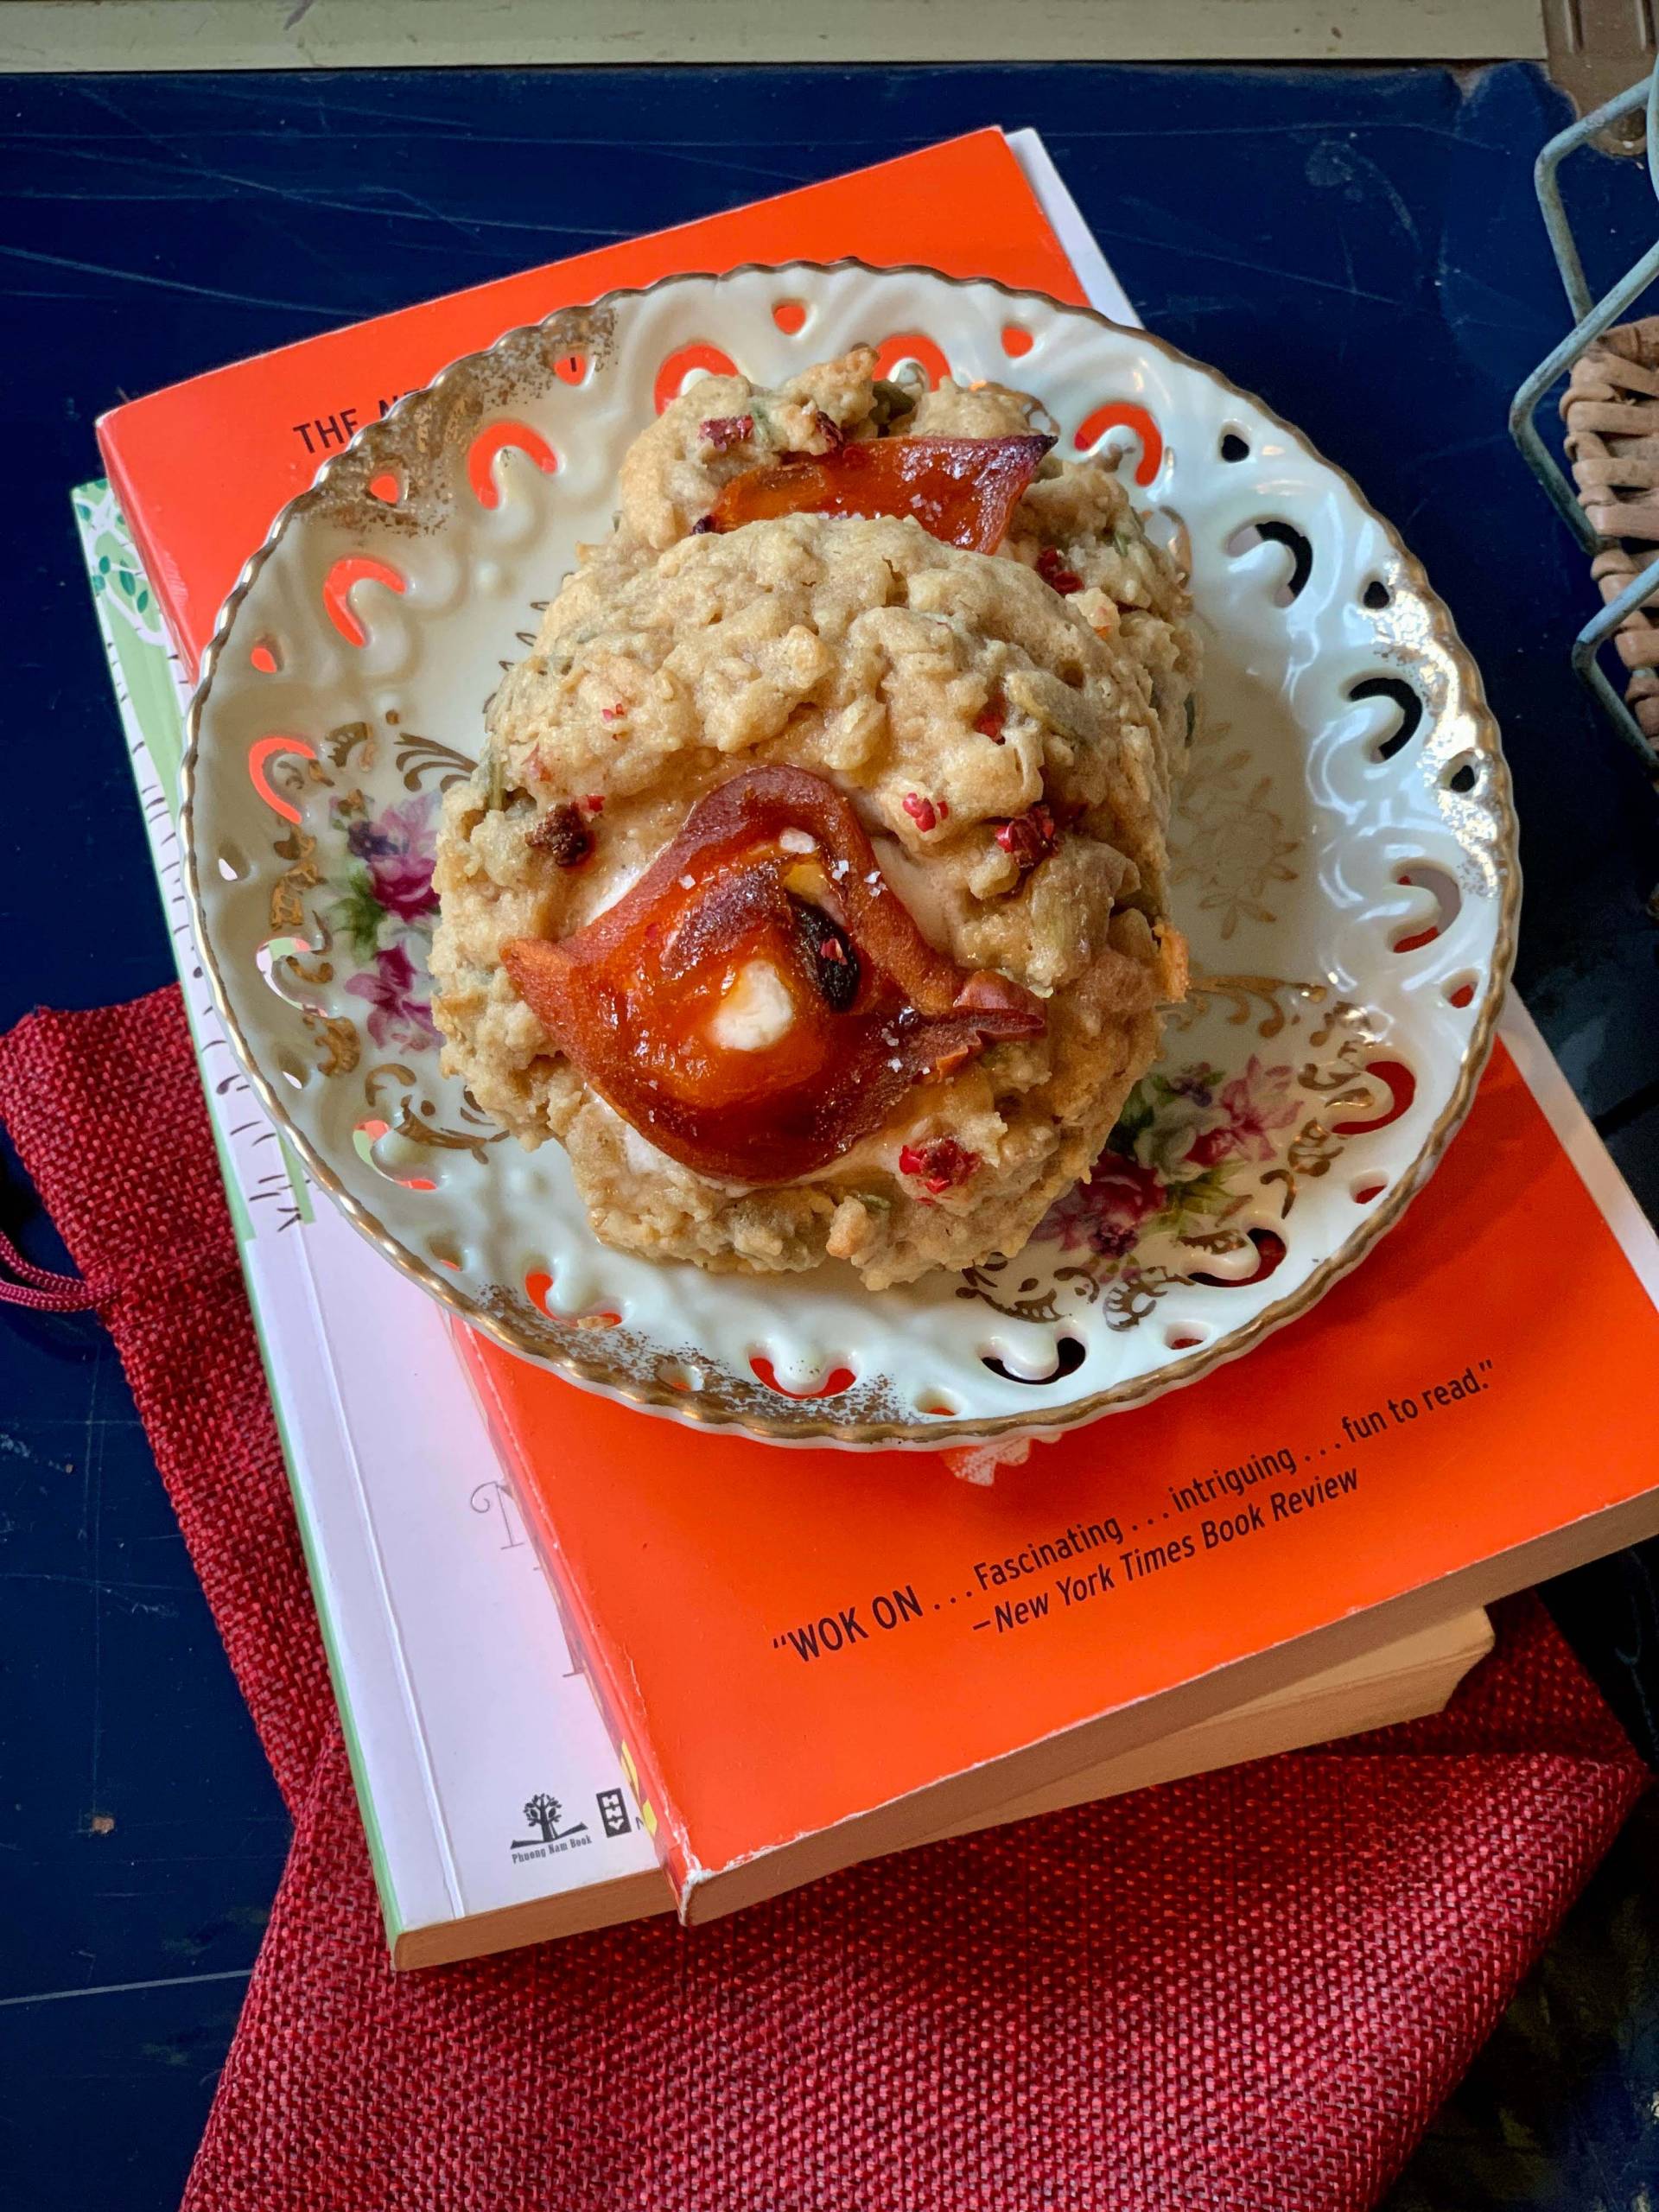 An oatmeal cooking on a plate, on top of a stack of books.